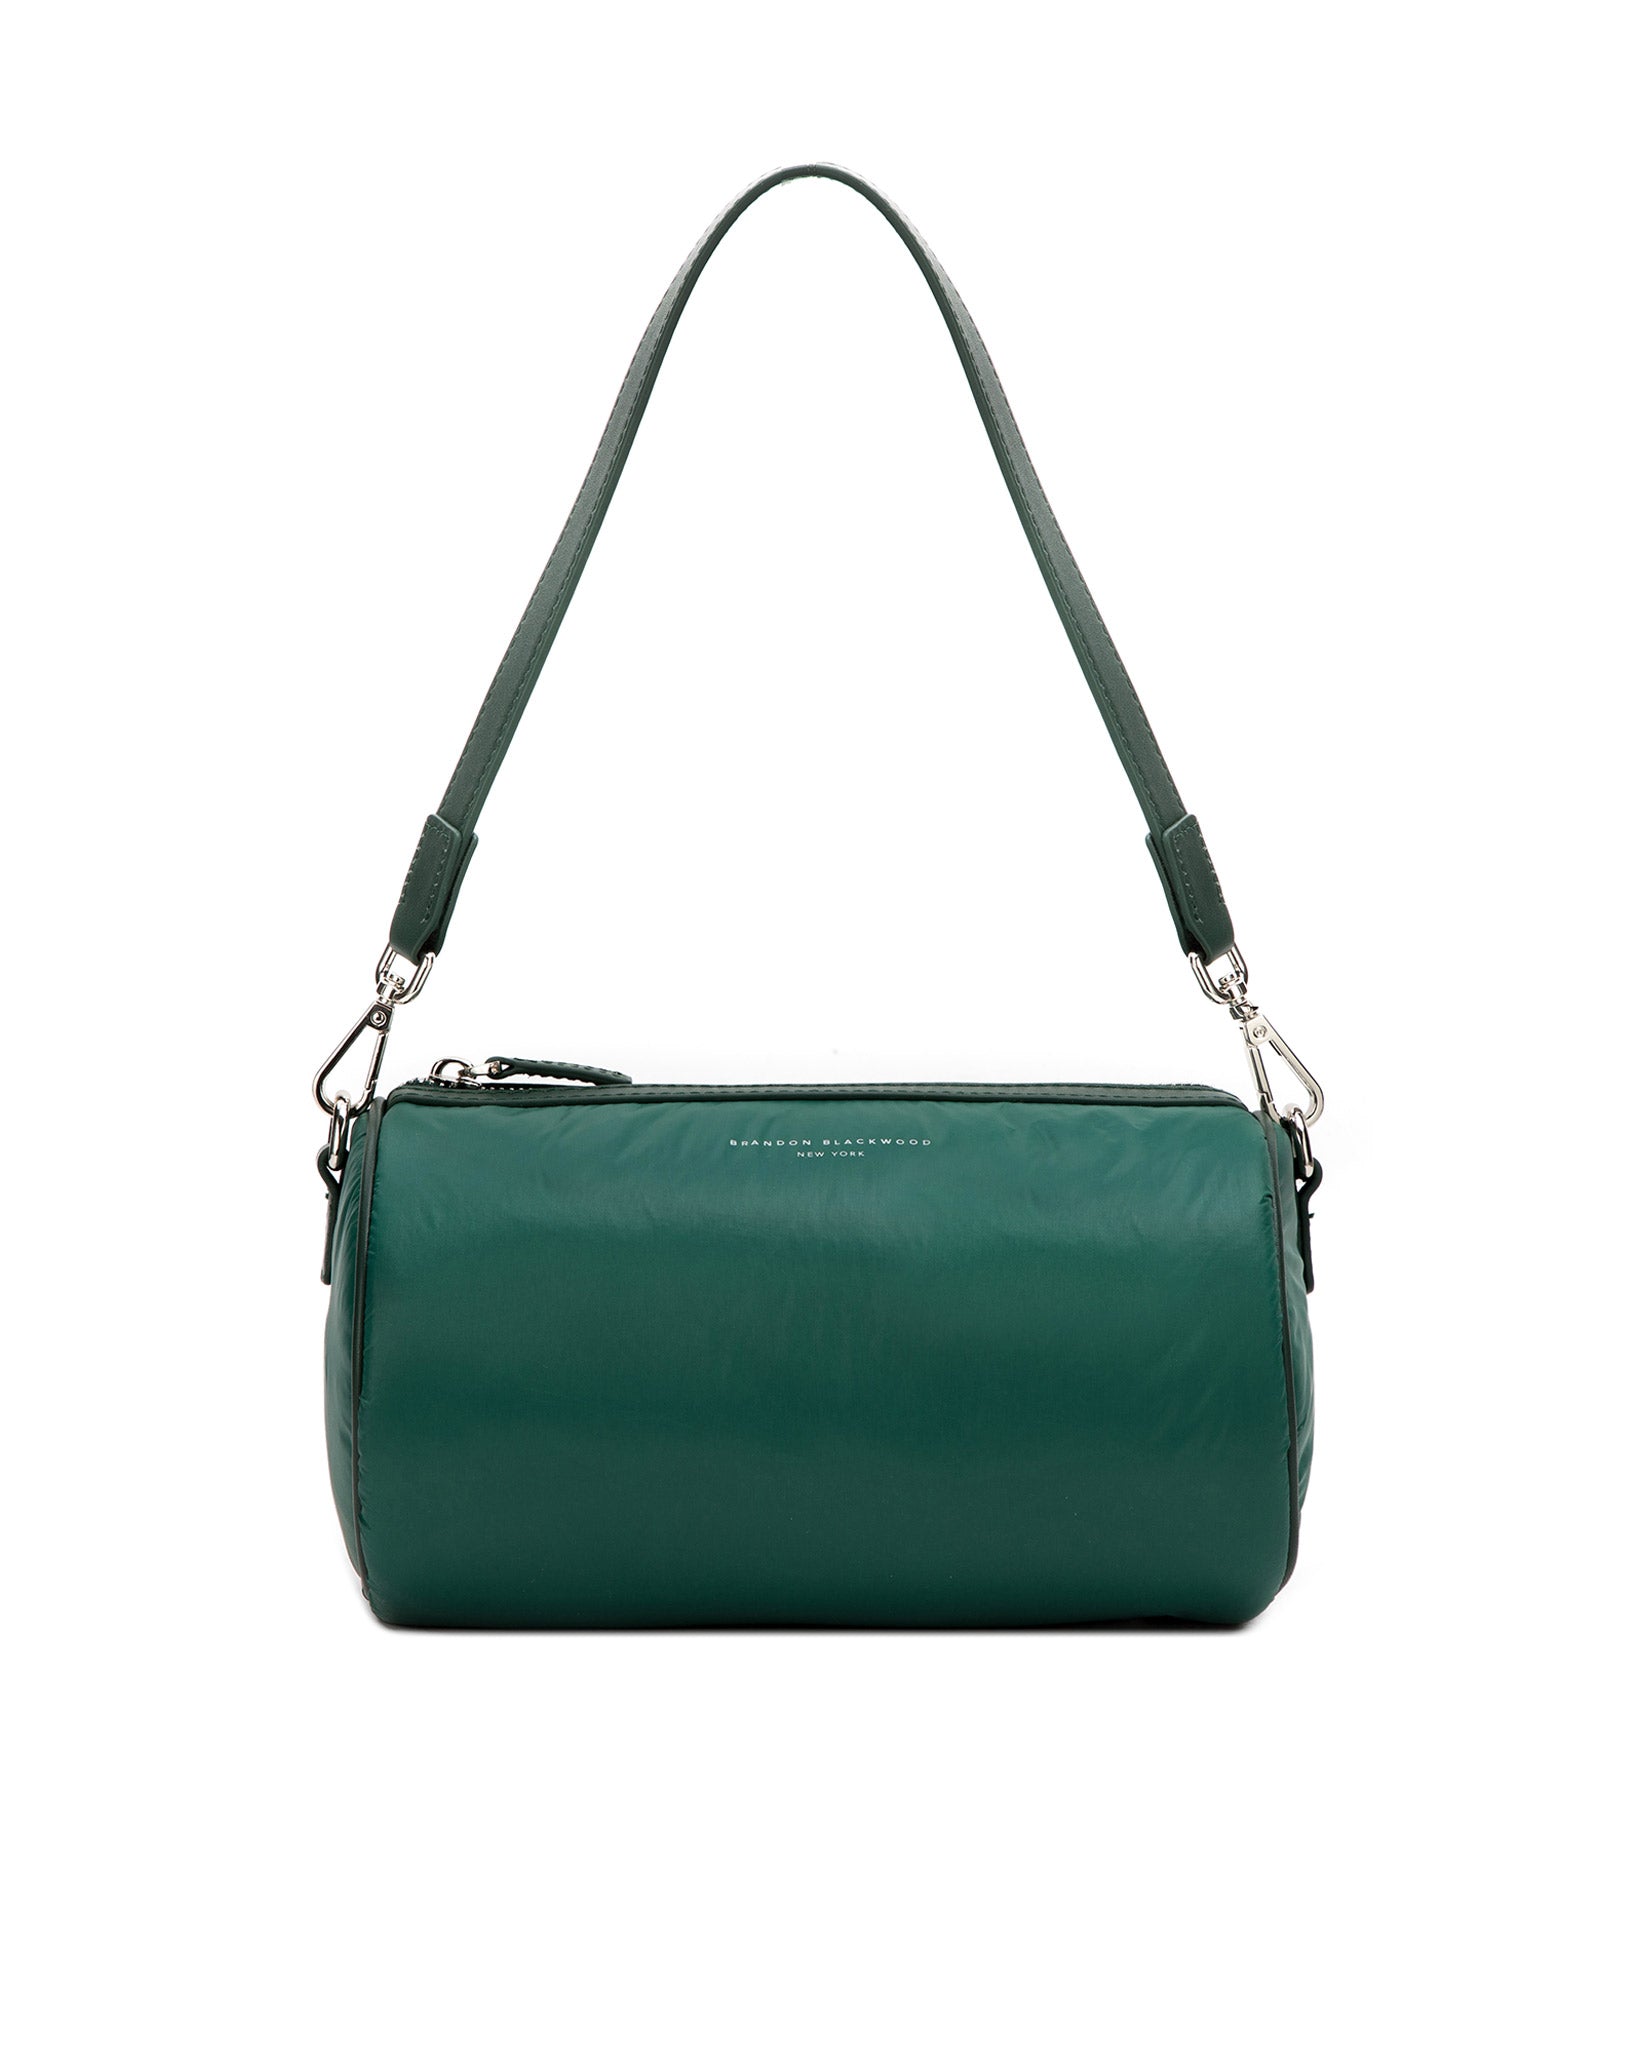 e-Nylon x Ostrich Leather Double Handle Bag, Green, One Size